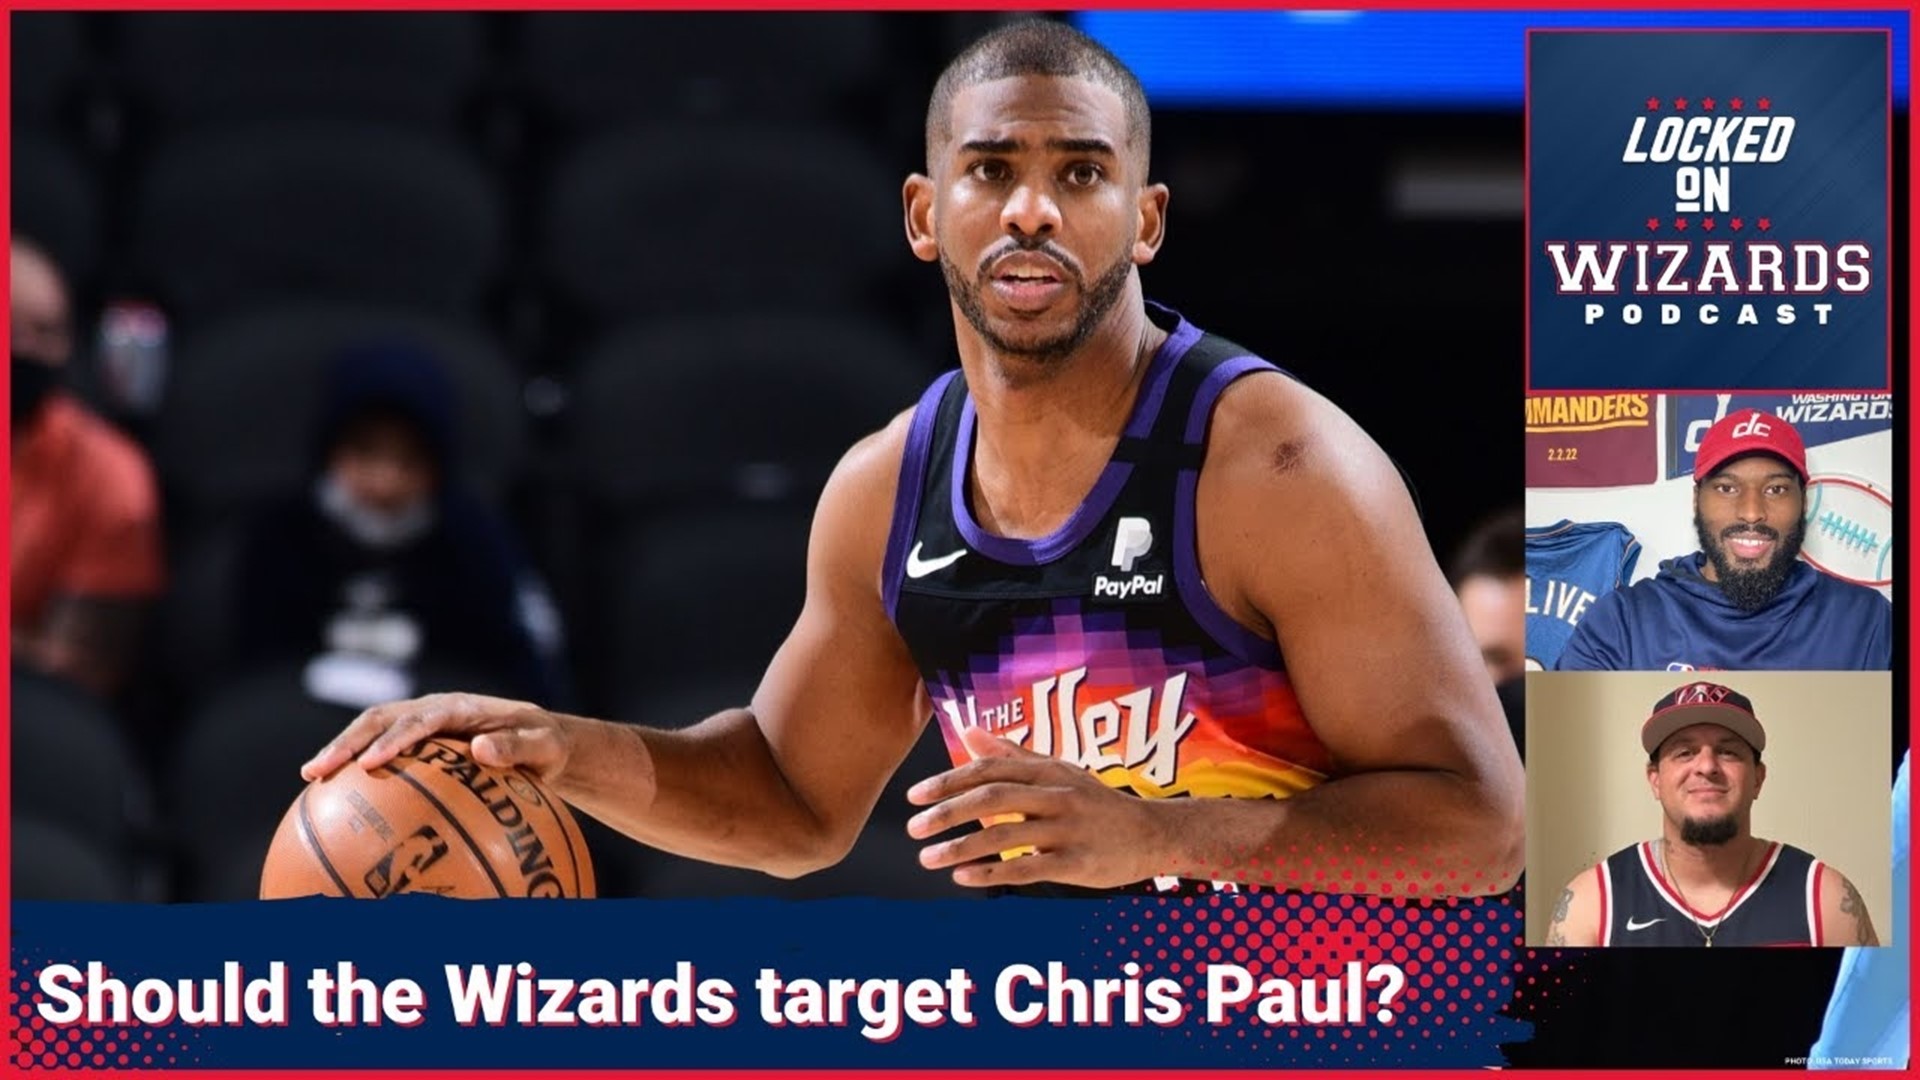 Ed & Brandon discuss whether the Wizards should trade for Chris Paul and what kind of impact he would have on the team.